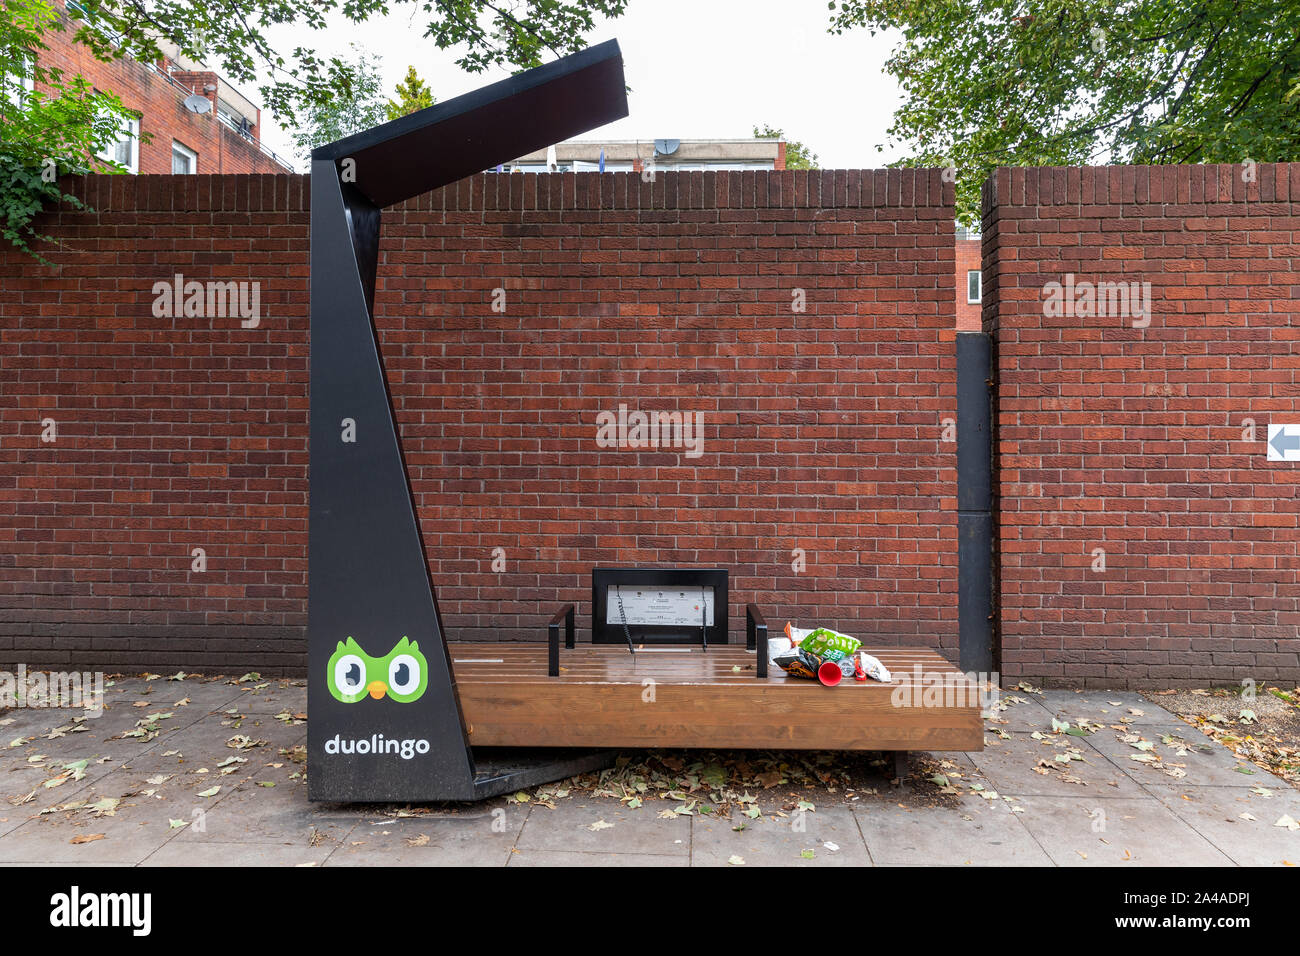 A Duolingo smart bench and a Strawberry Energy solar powered free mobile charging point on a city street in London. Stock Photo